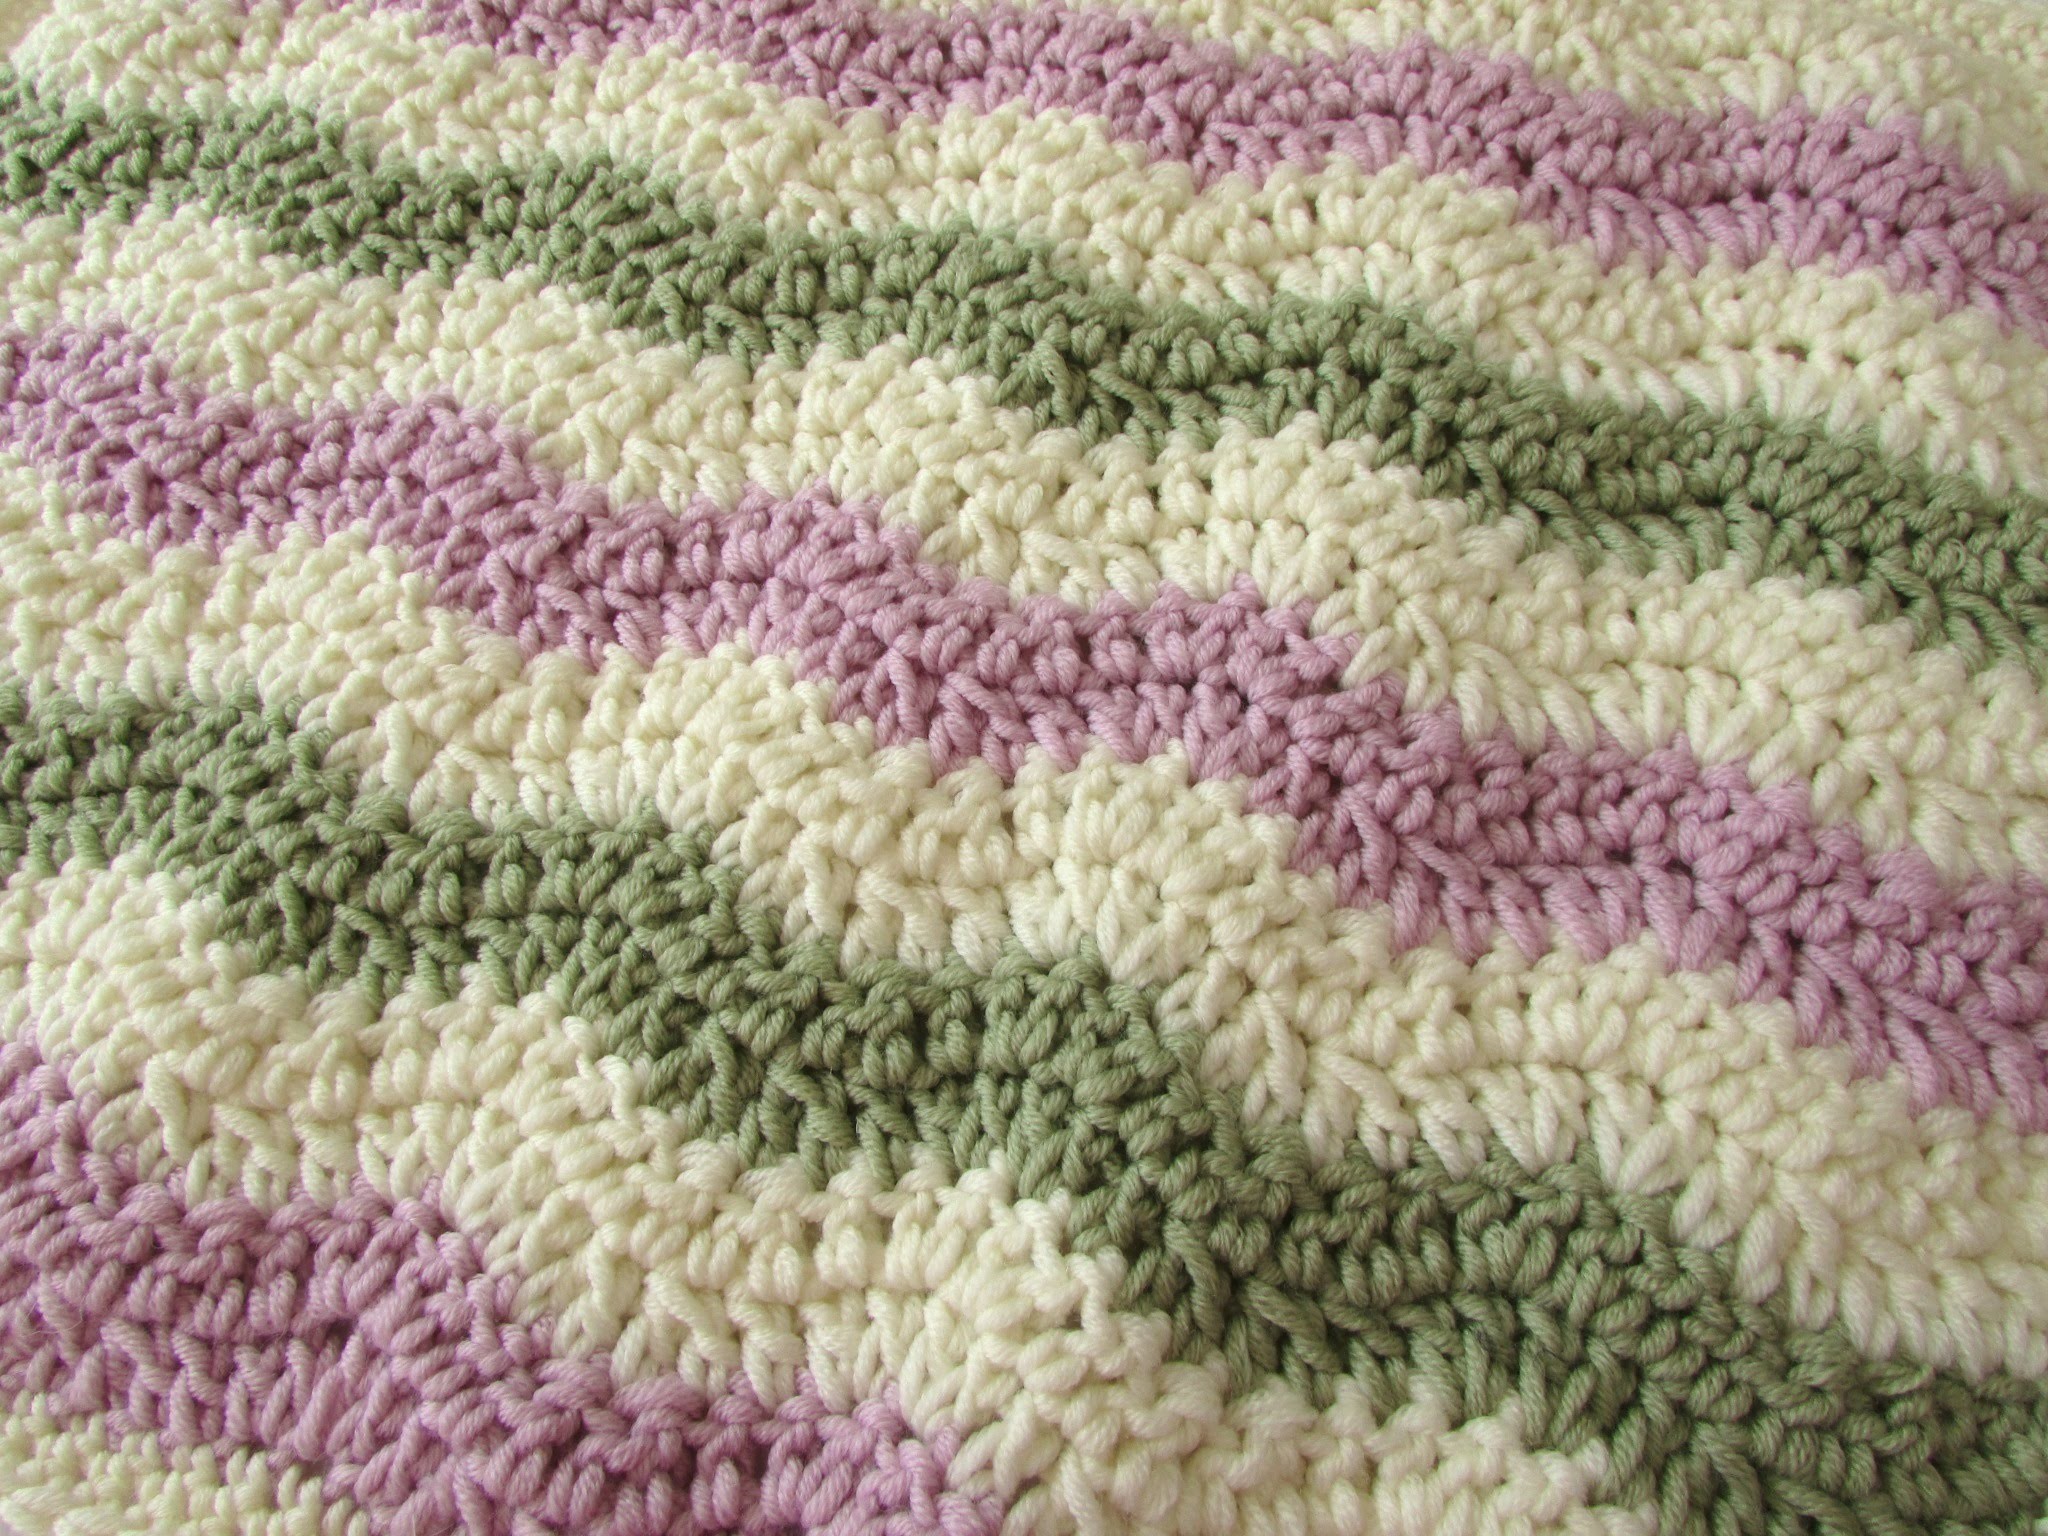 How to crochet a chevron. wave blanket for beginners